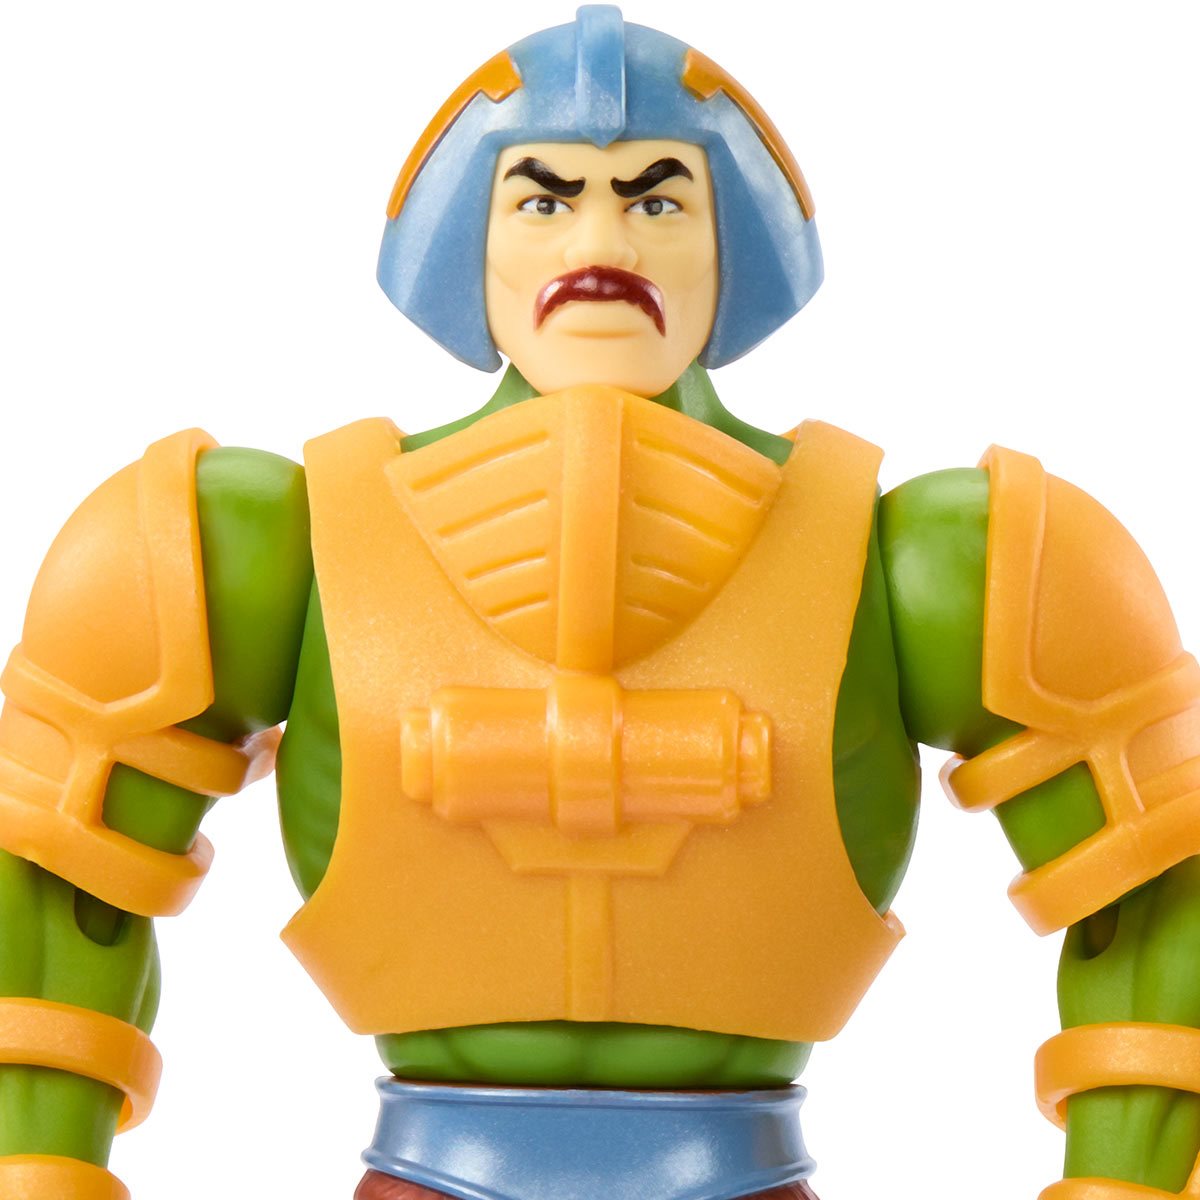 Masters of the Universe Origins vintage style figures will exit